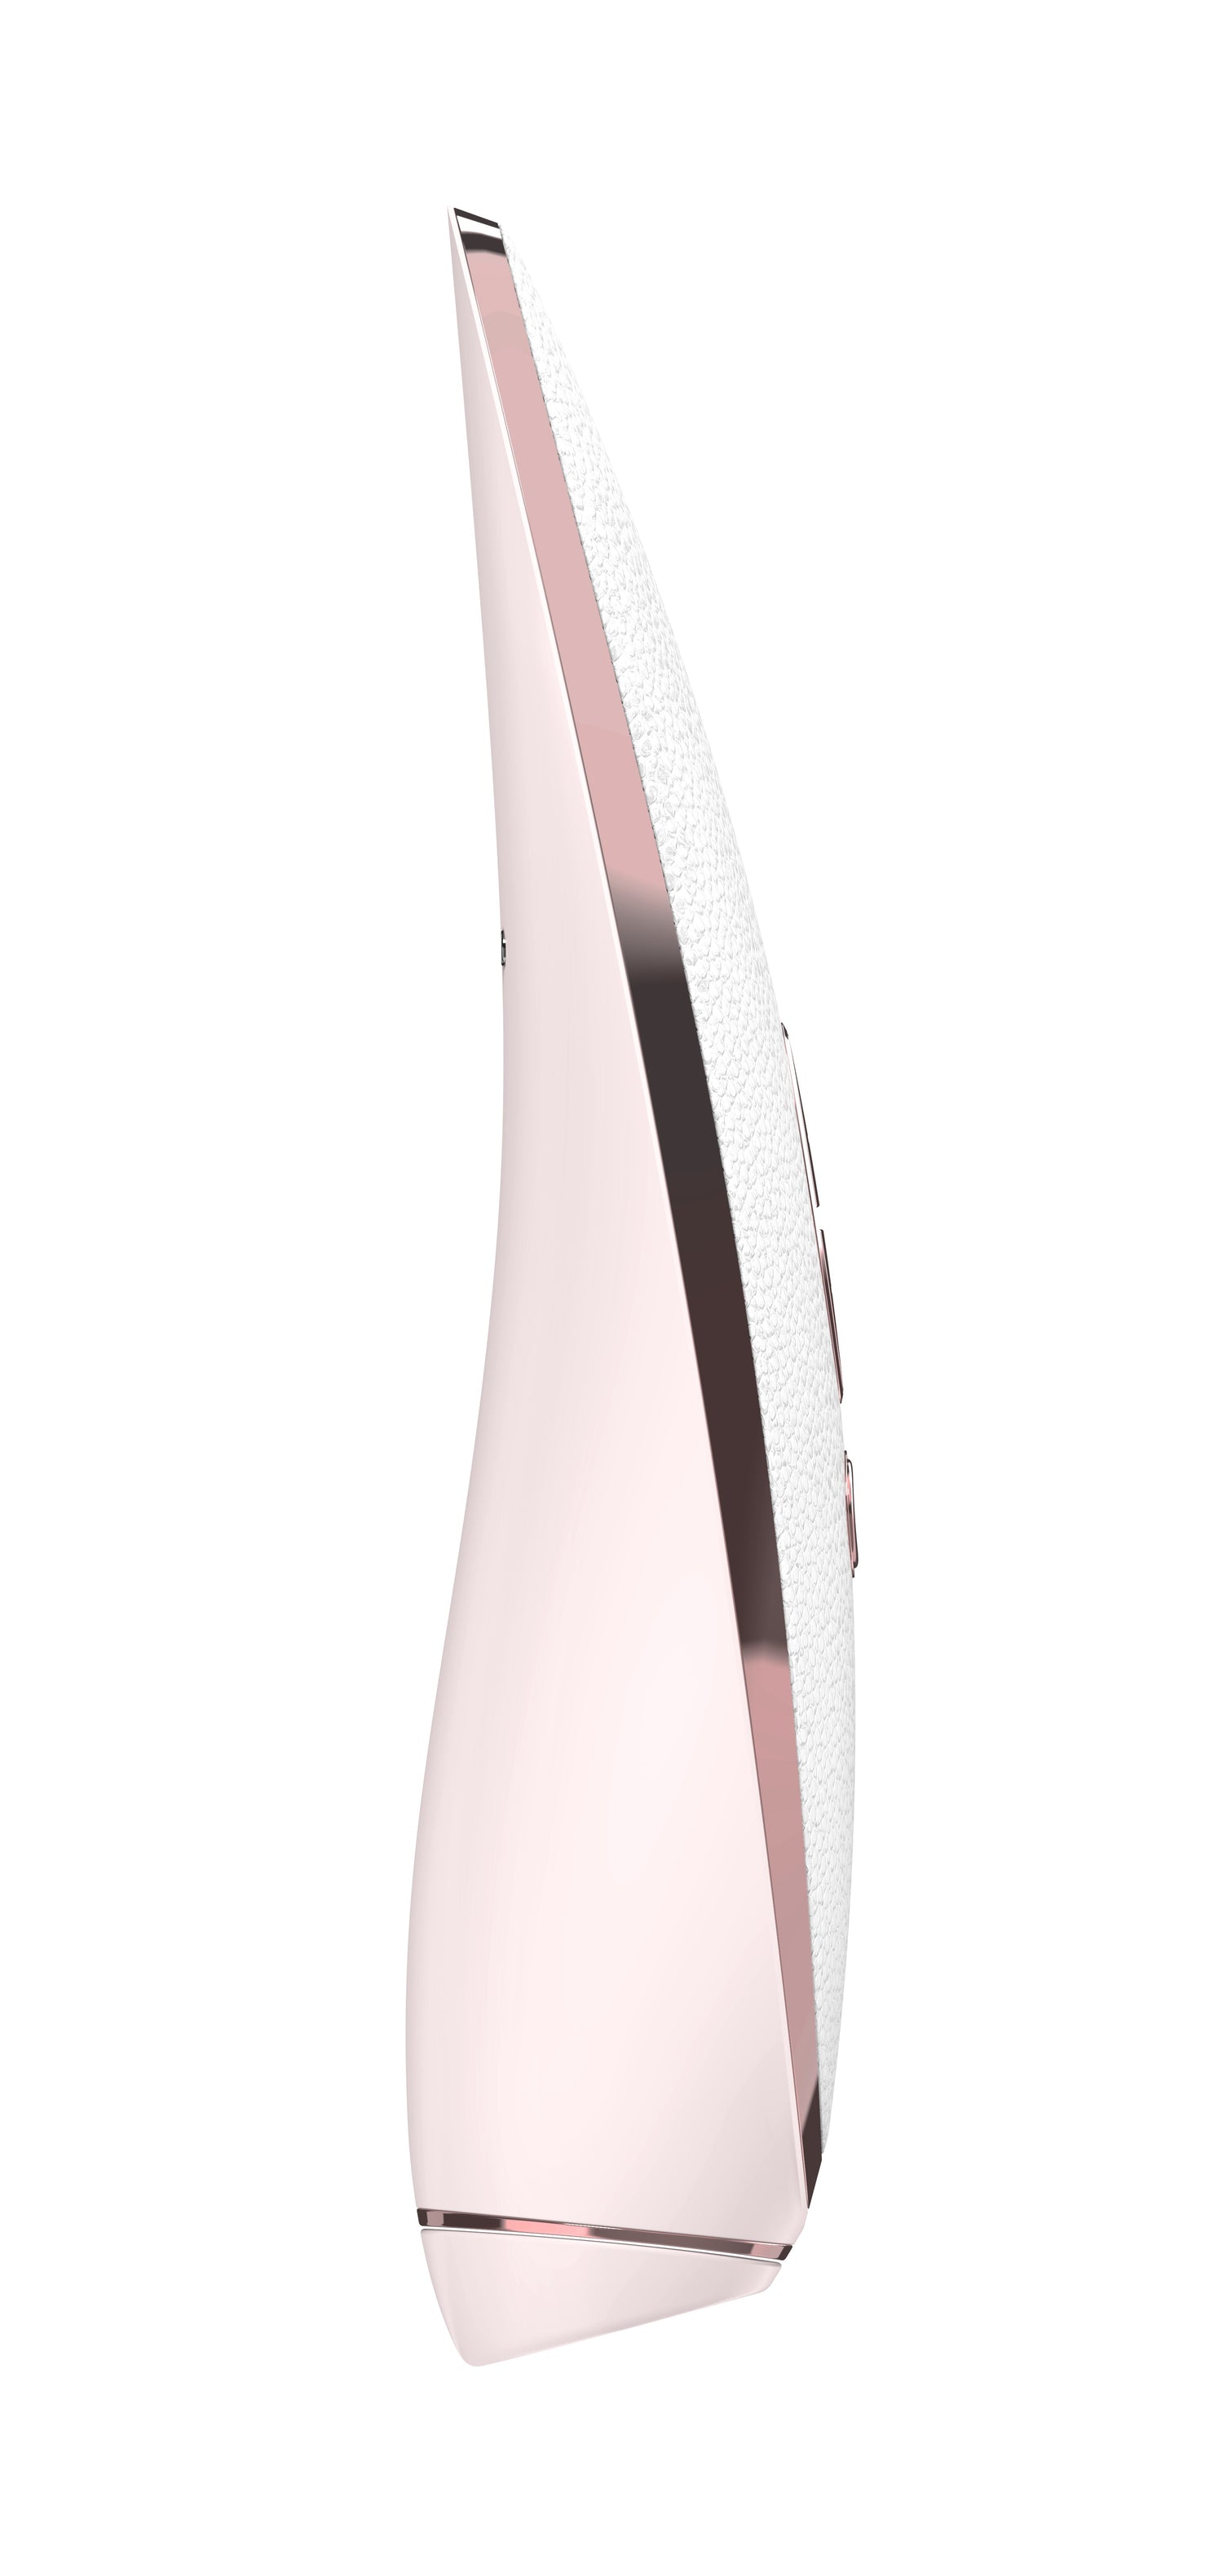 Satisfyer Luxury Pret A Porter - Just for you desires